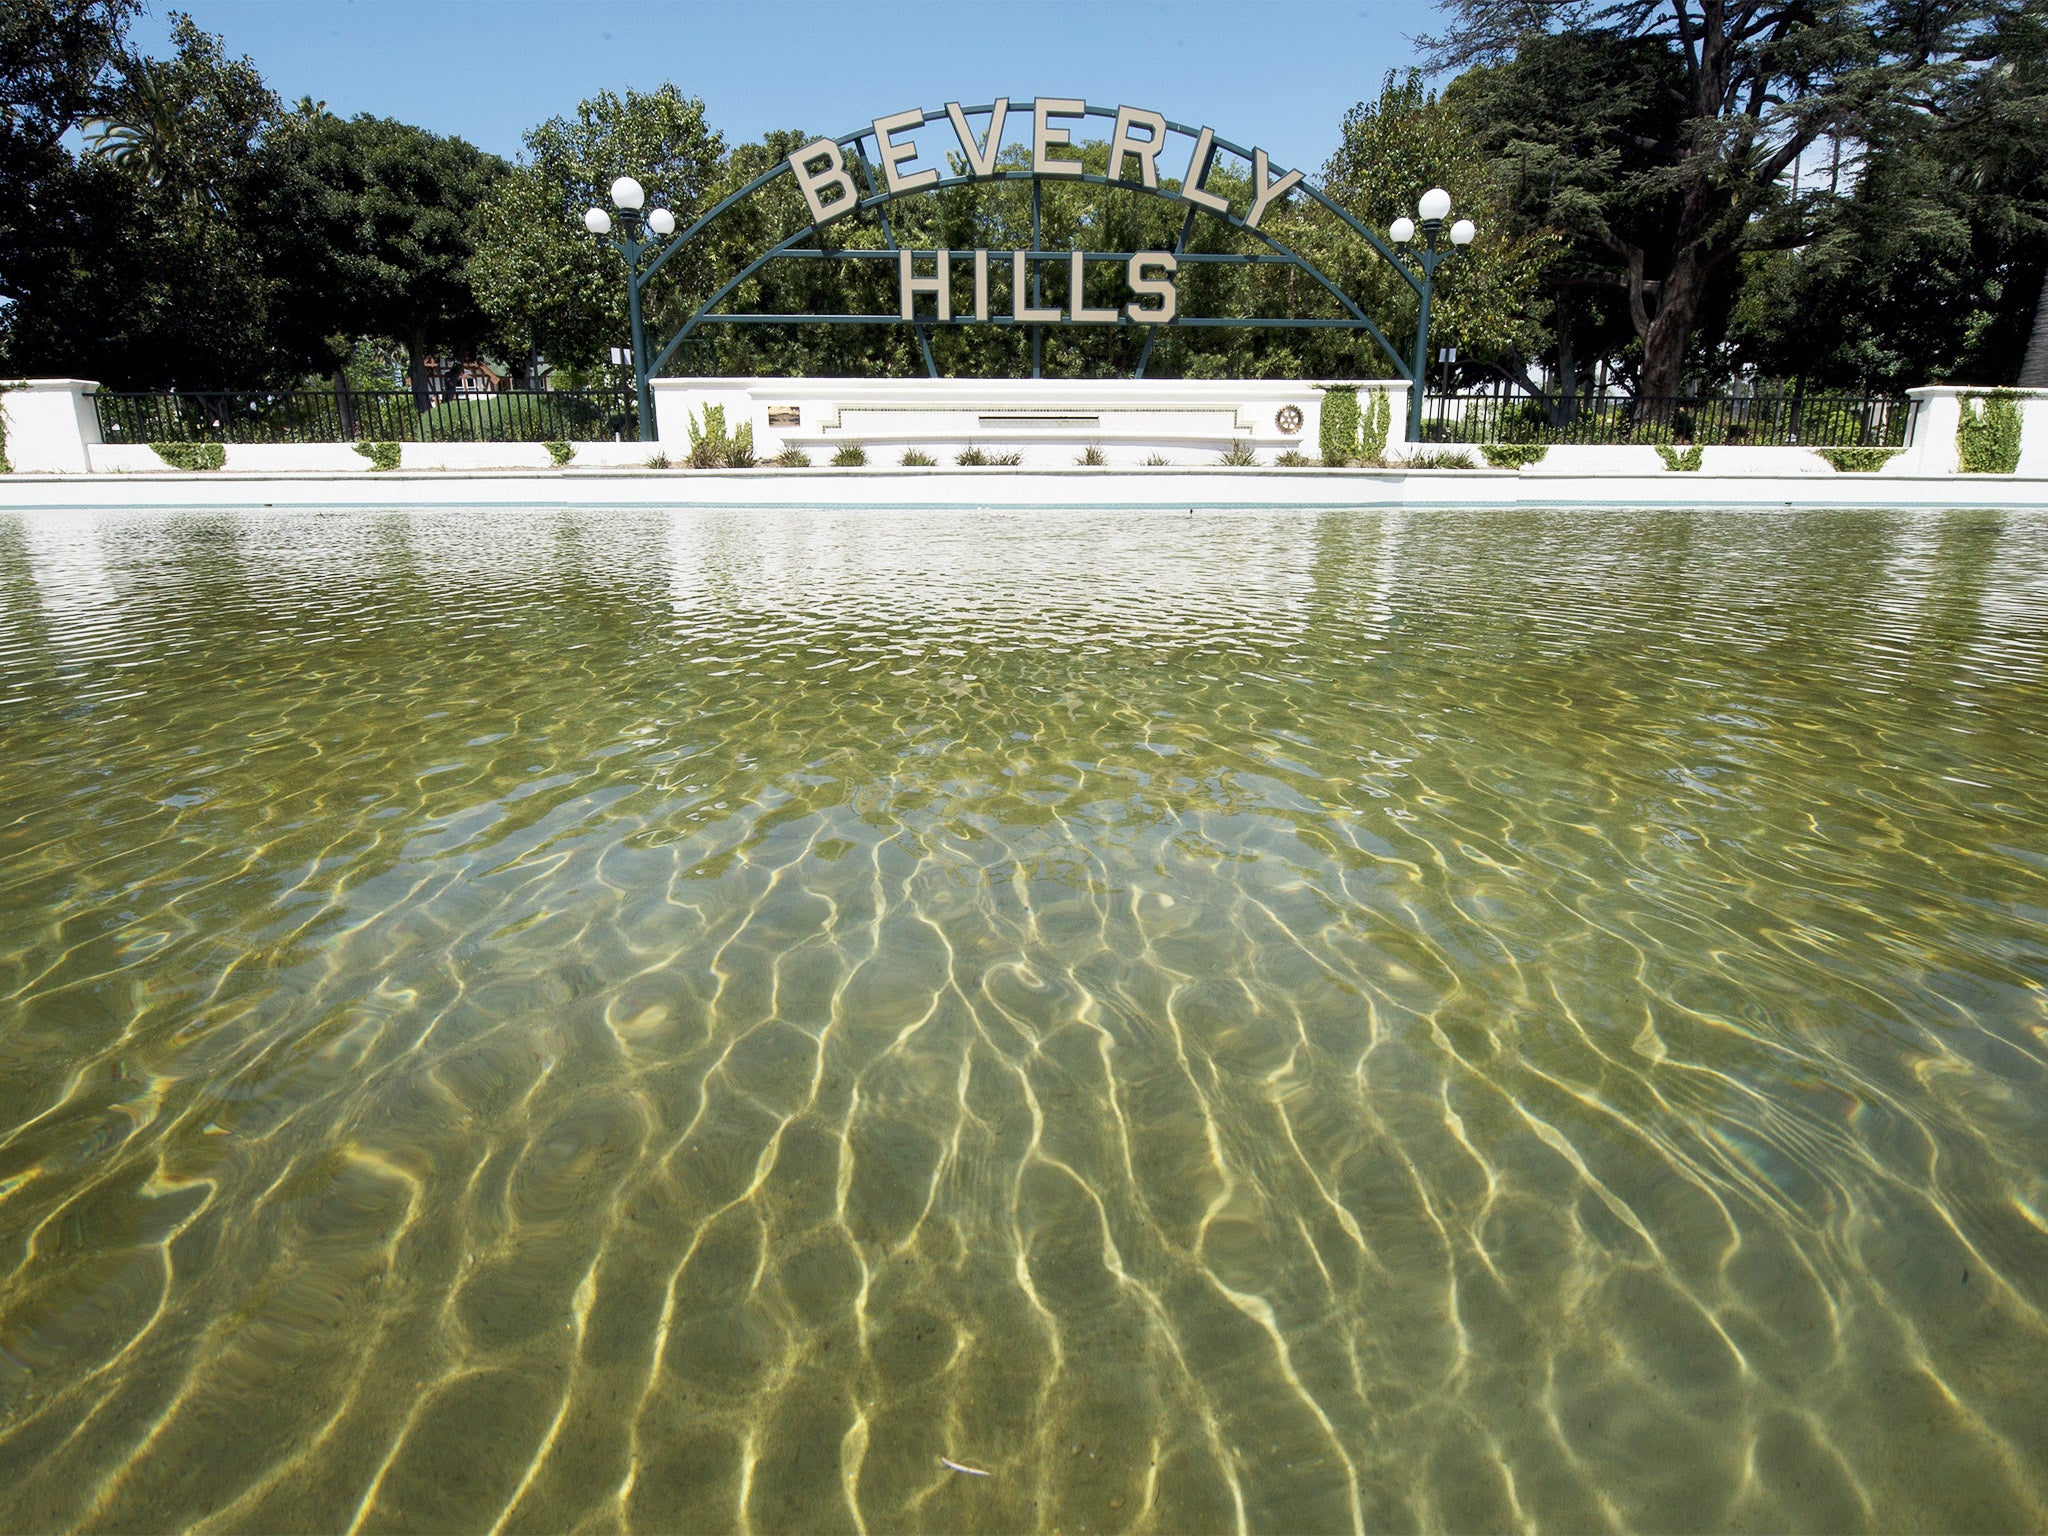 &#13;
The city of Beverly Hills failed persistently to meet its own water-saving targets (Getty)&#13;